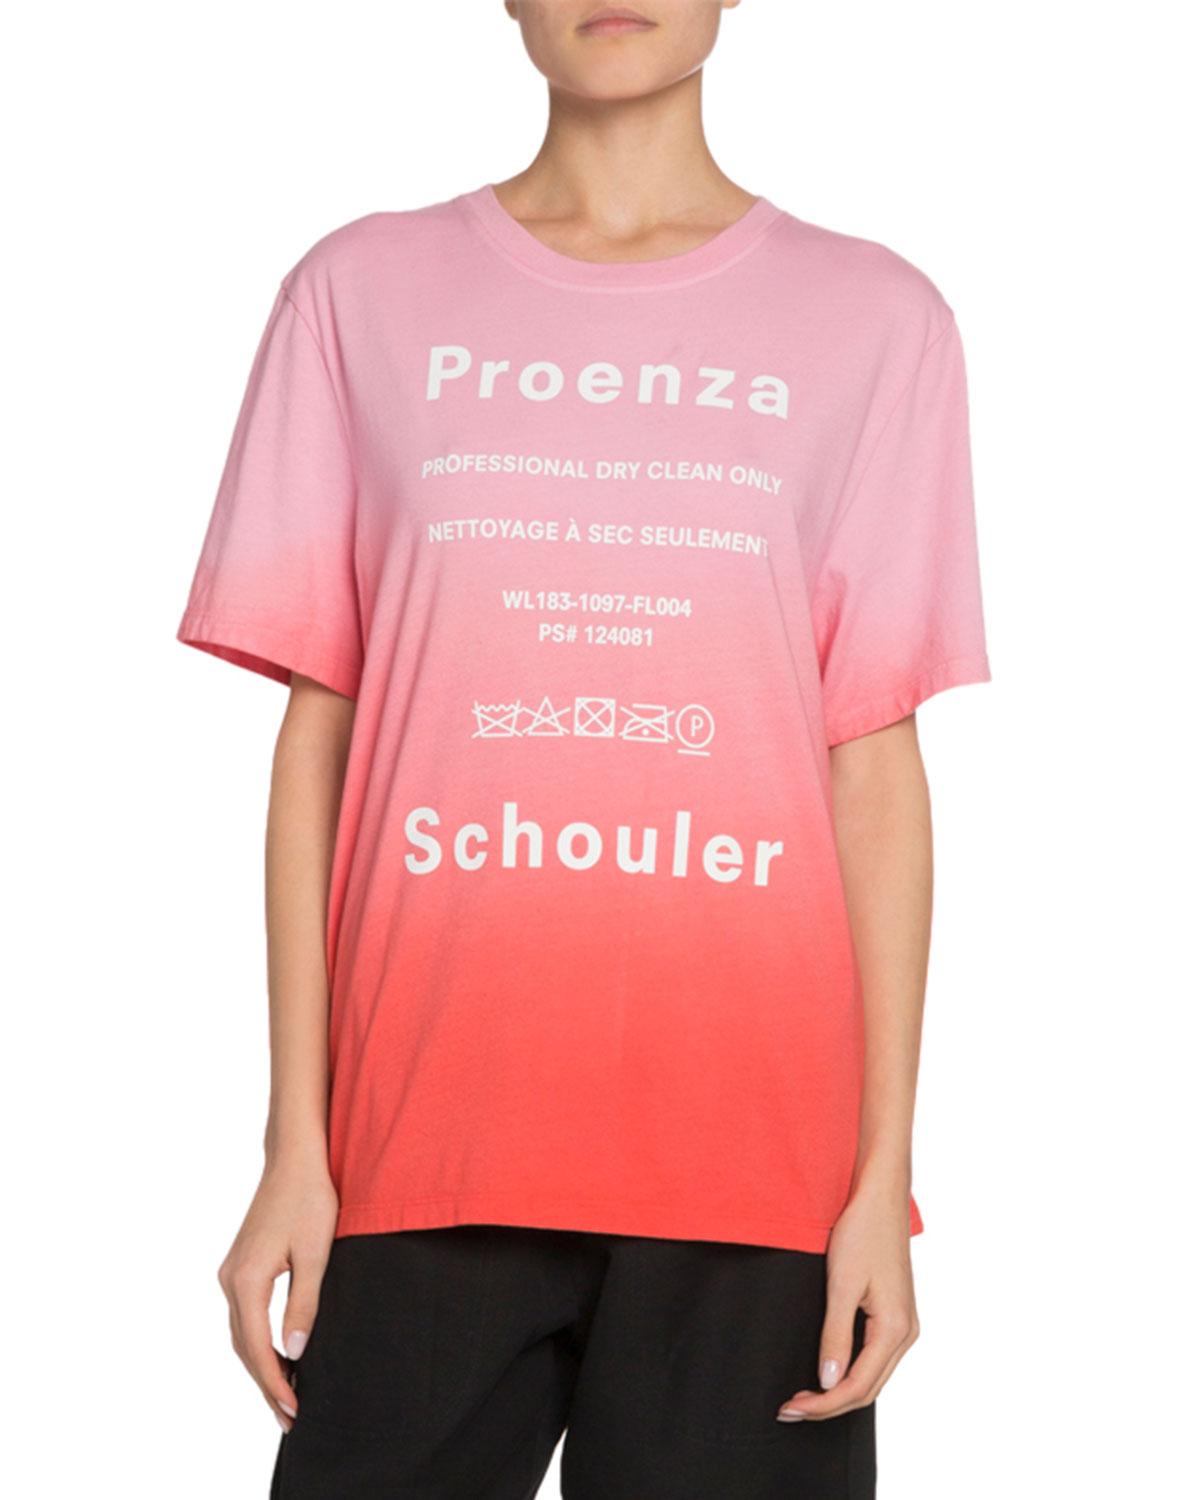 Proenza Schouler Printed Cotton T-shirt in Pink - Lyst